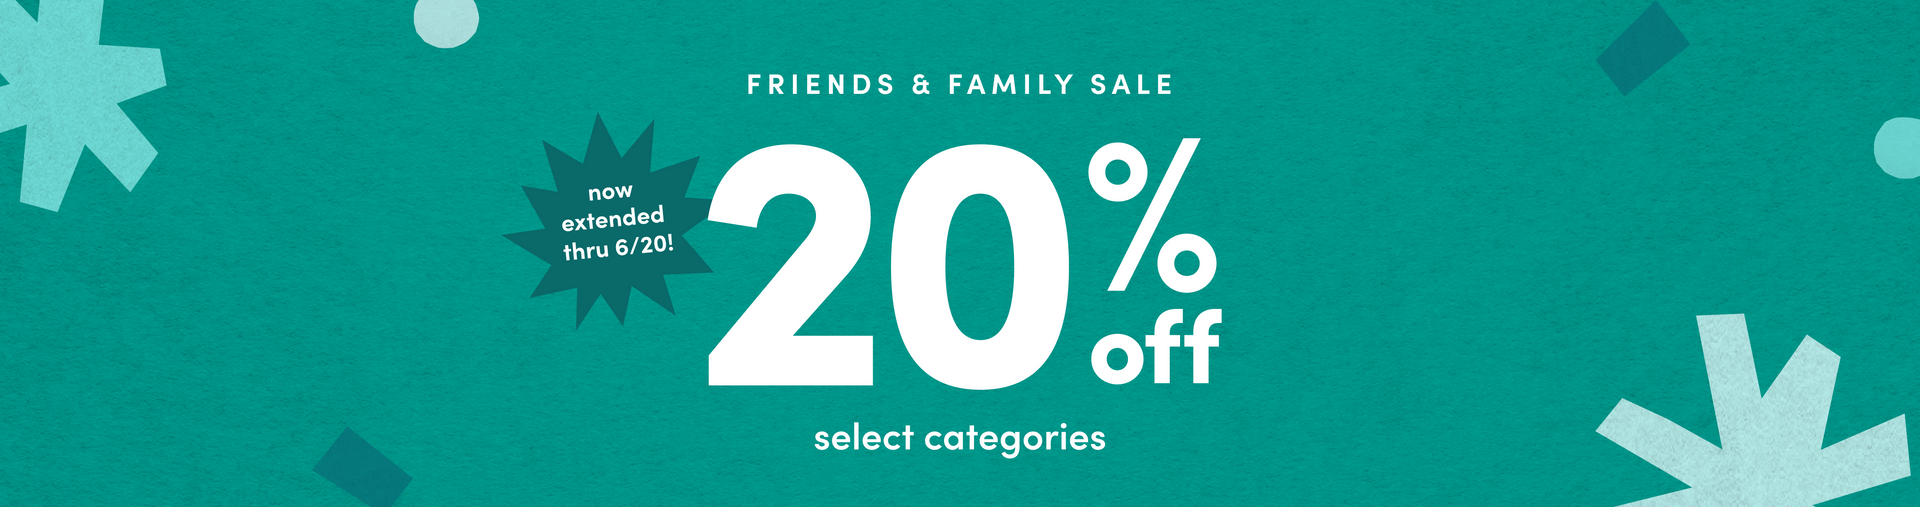 FRIENDS & FAMILY SALE 20% off select categories now extended thru 6/20!